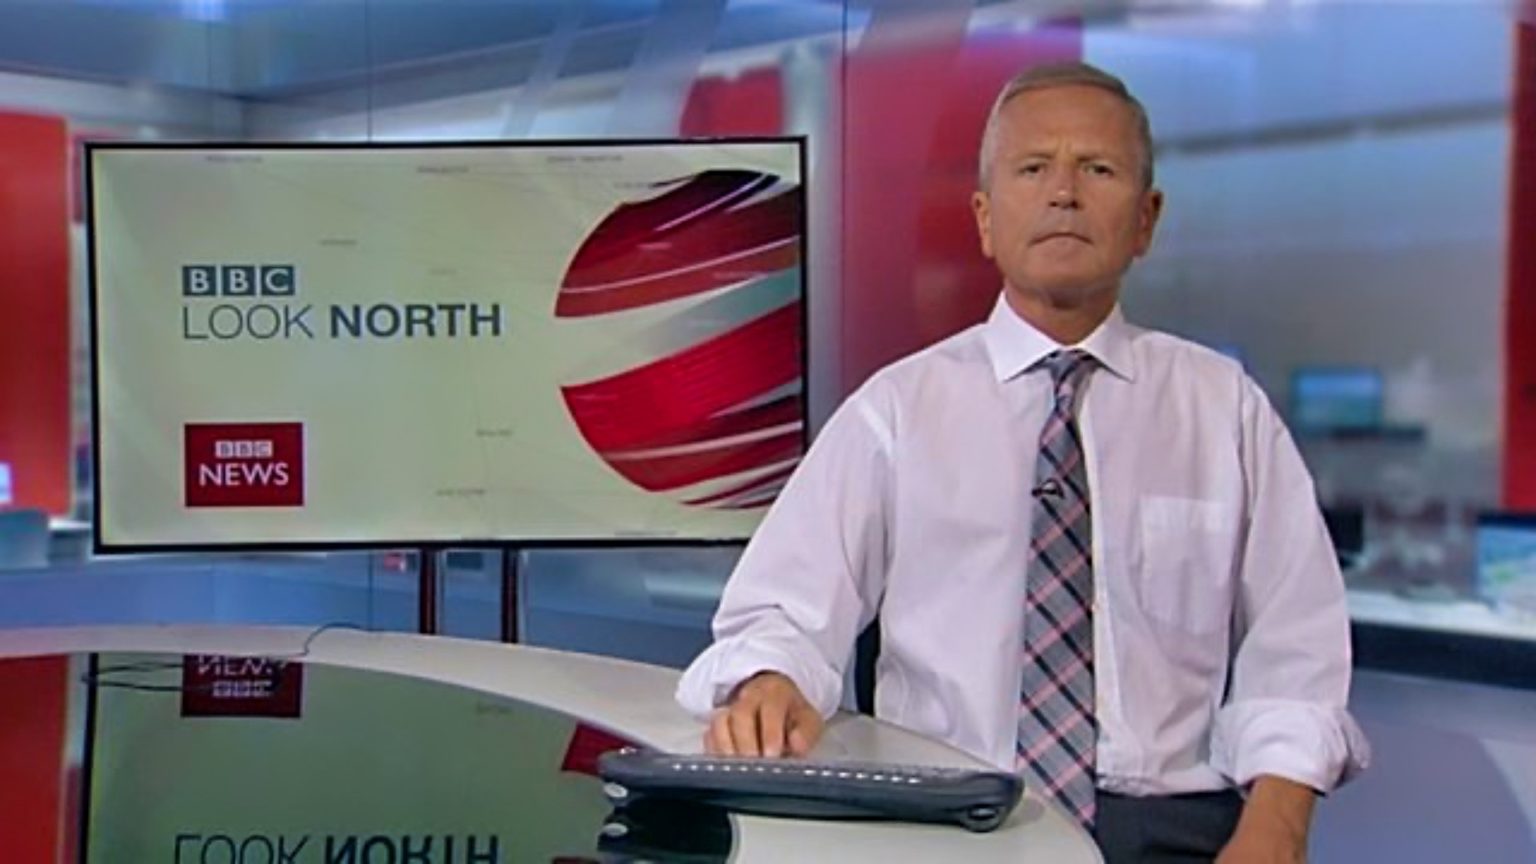 Peter Levy in high definition! BBC One HD to roll out regionally next year